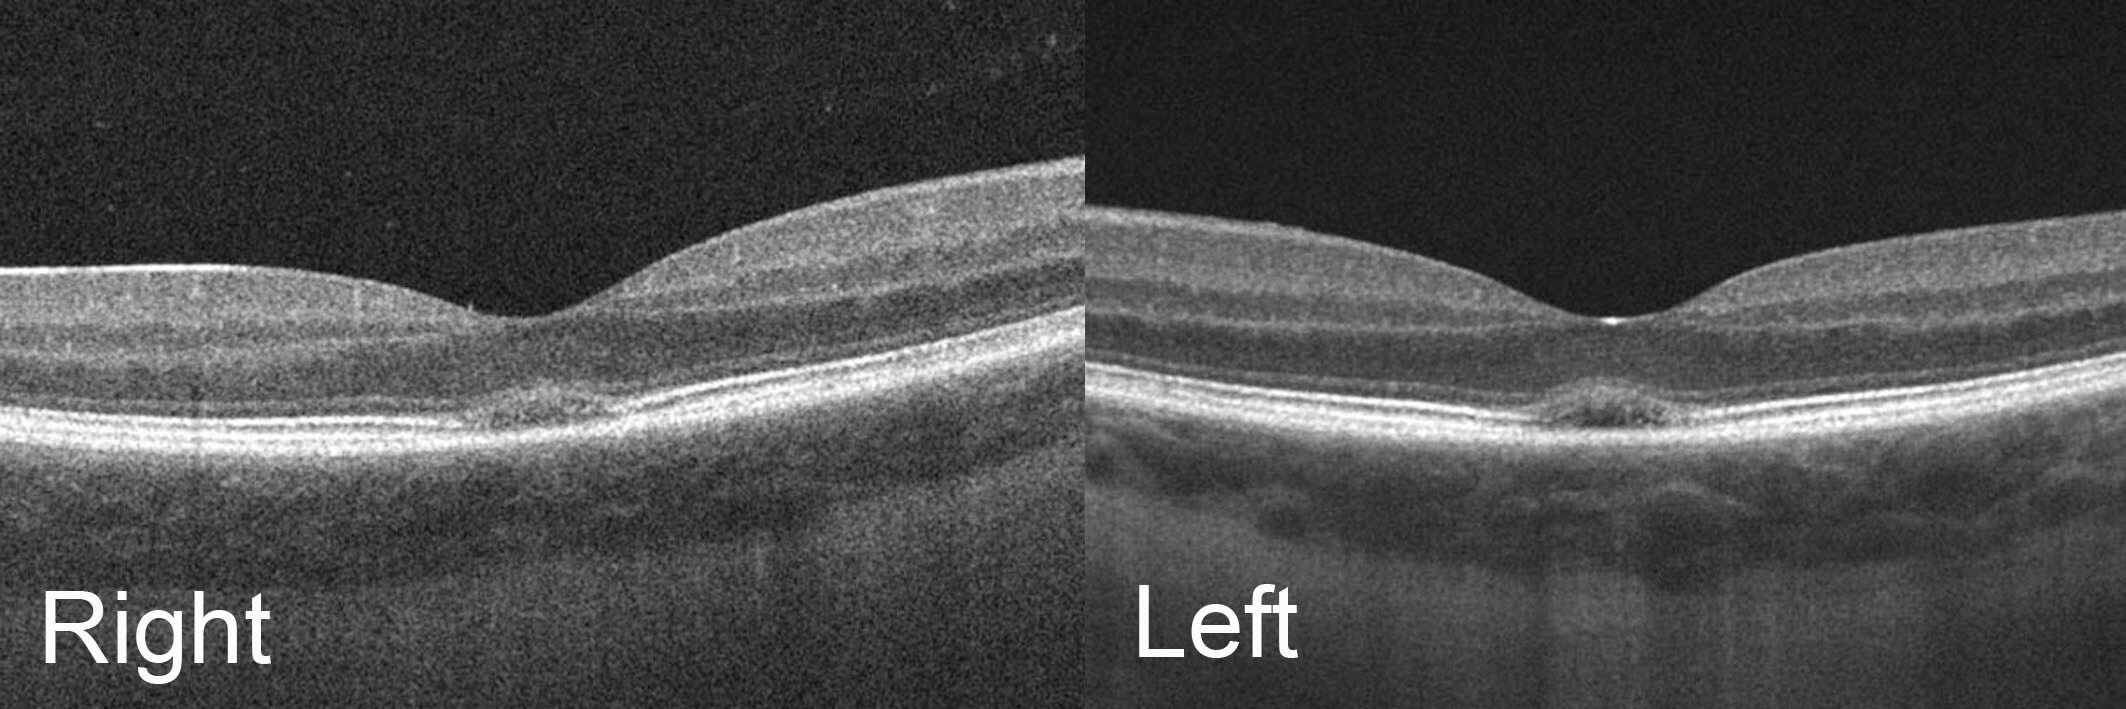 Optical coherence tomography images demonstrates dome shaped retinal elevations and subfoveal ellipsoid layer (inner segment/outer segment) loss.